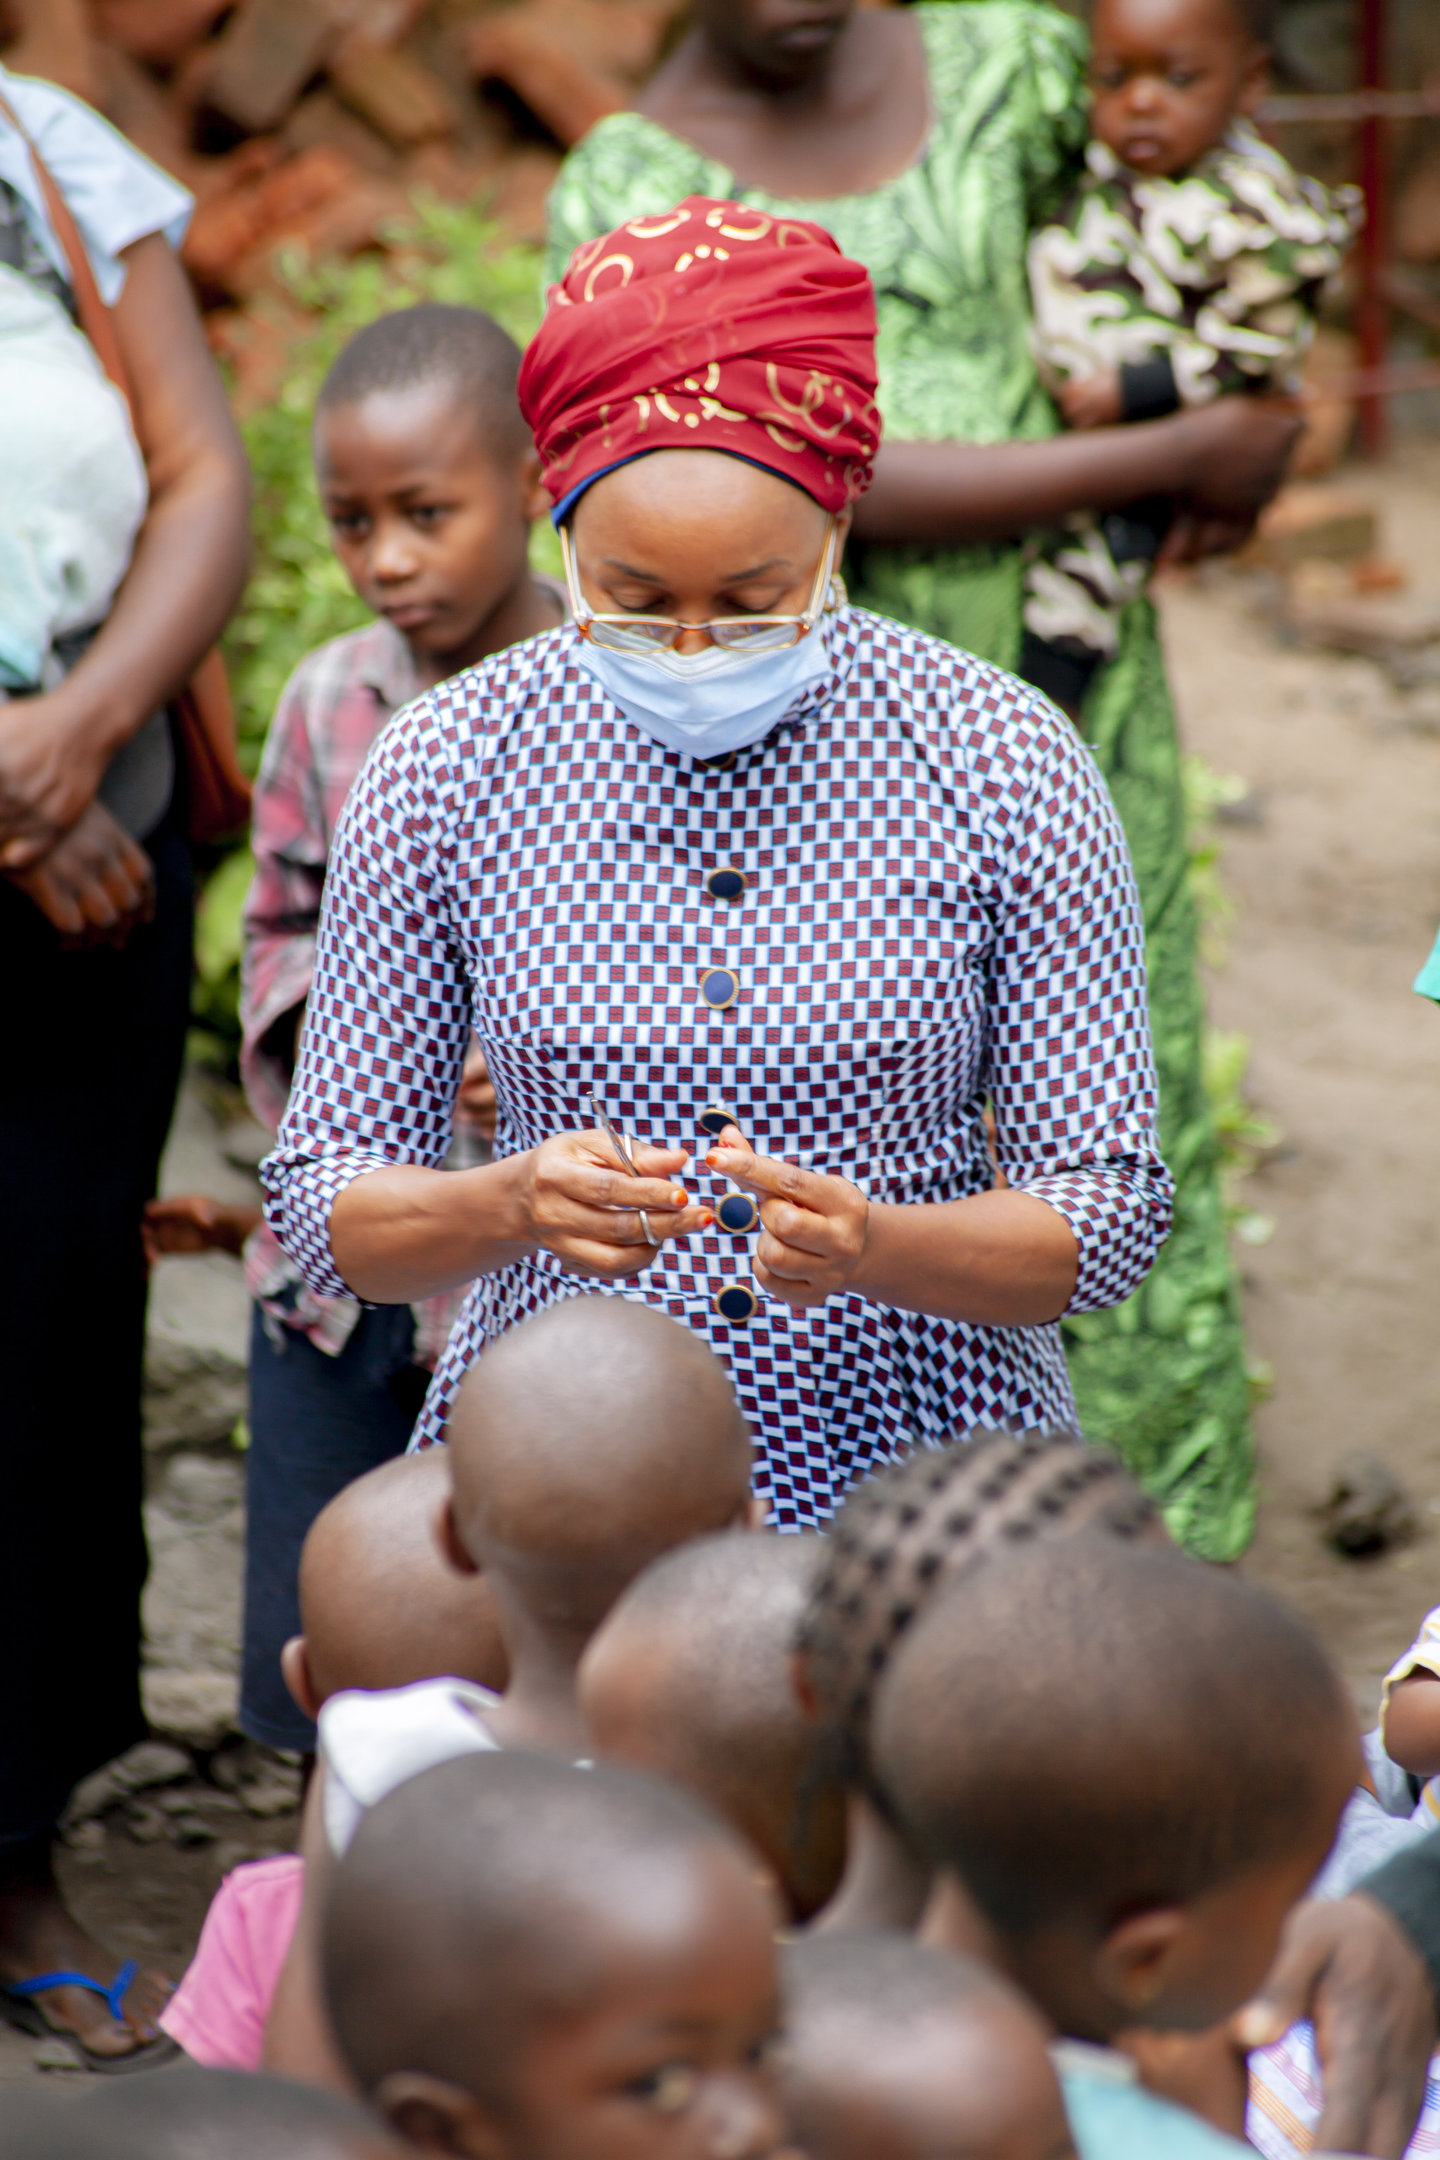 A woman in a checkered blue dress wearing a medical mask cuts open a vitamin A capsule to give to young children who are lined up in front of her.